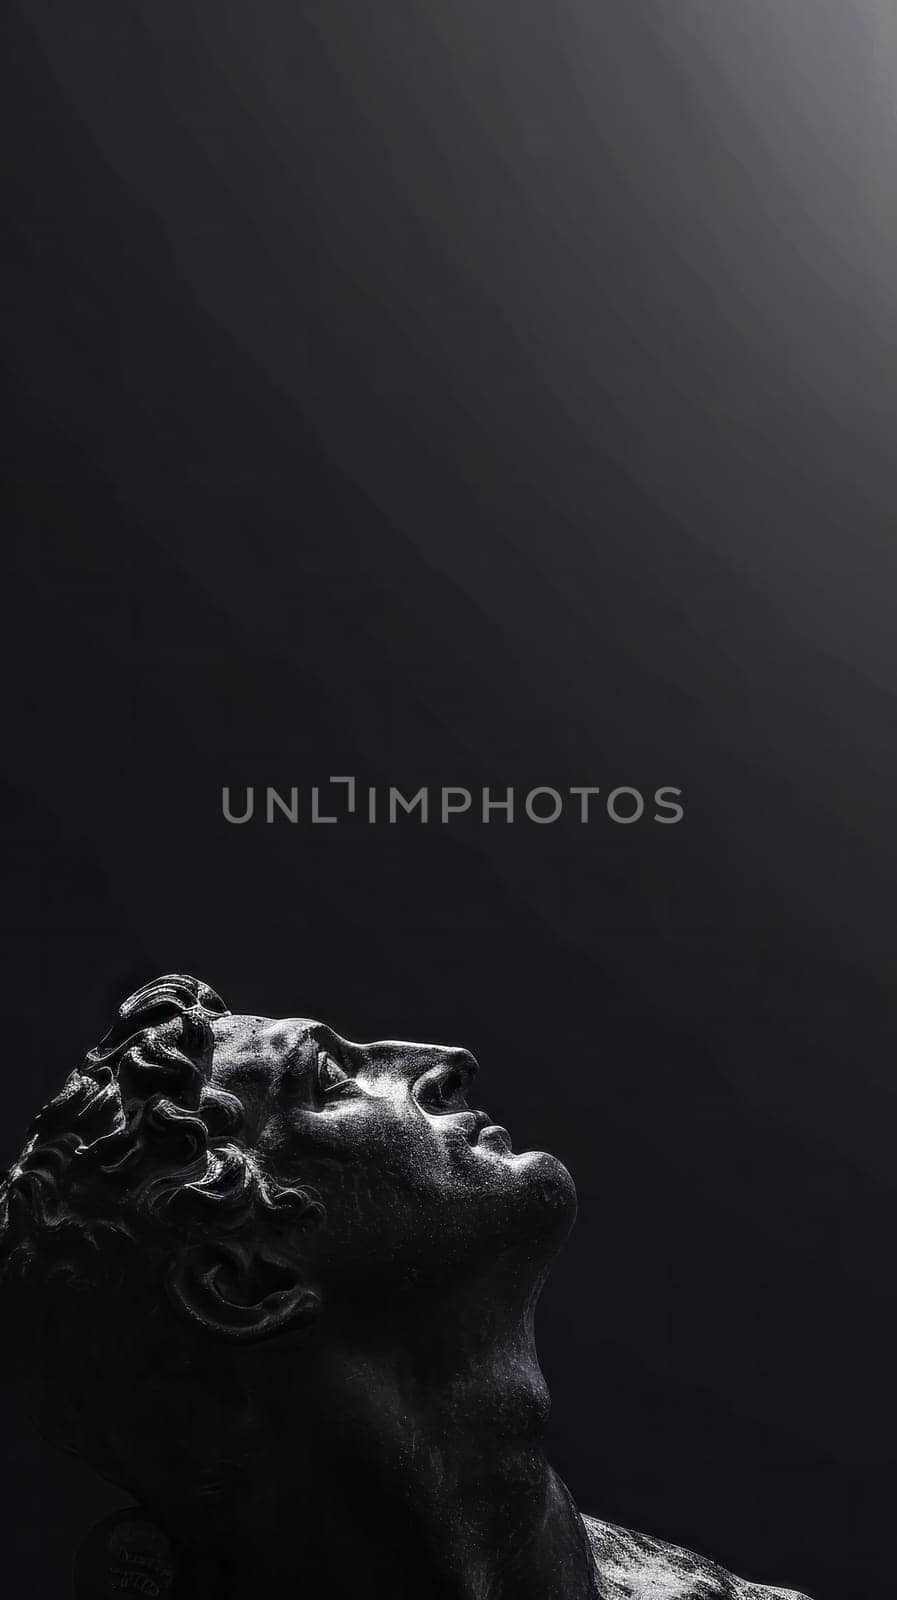 dramatic black and white portrayal of a classical sculpture, focusing on the upward gaze of the figure, suggesting contemplation or aspiration, set against a dark background with ample copy space.